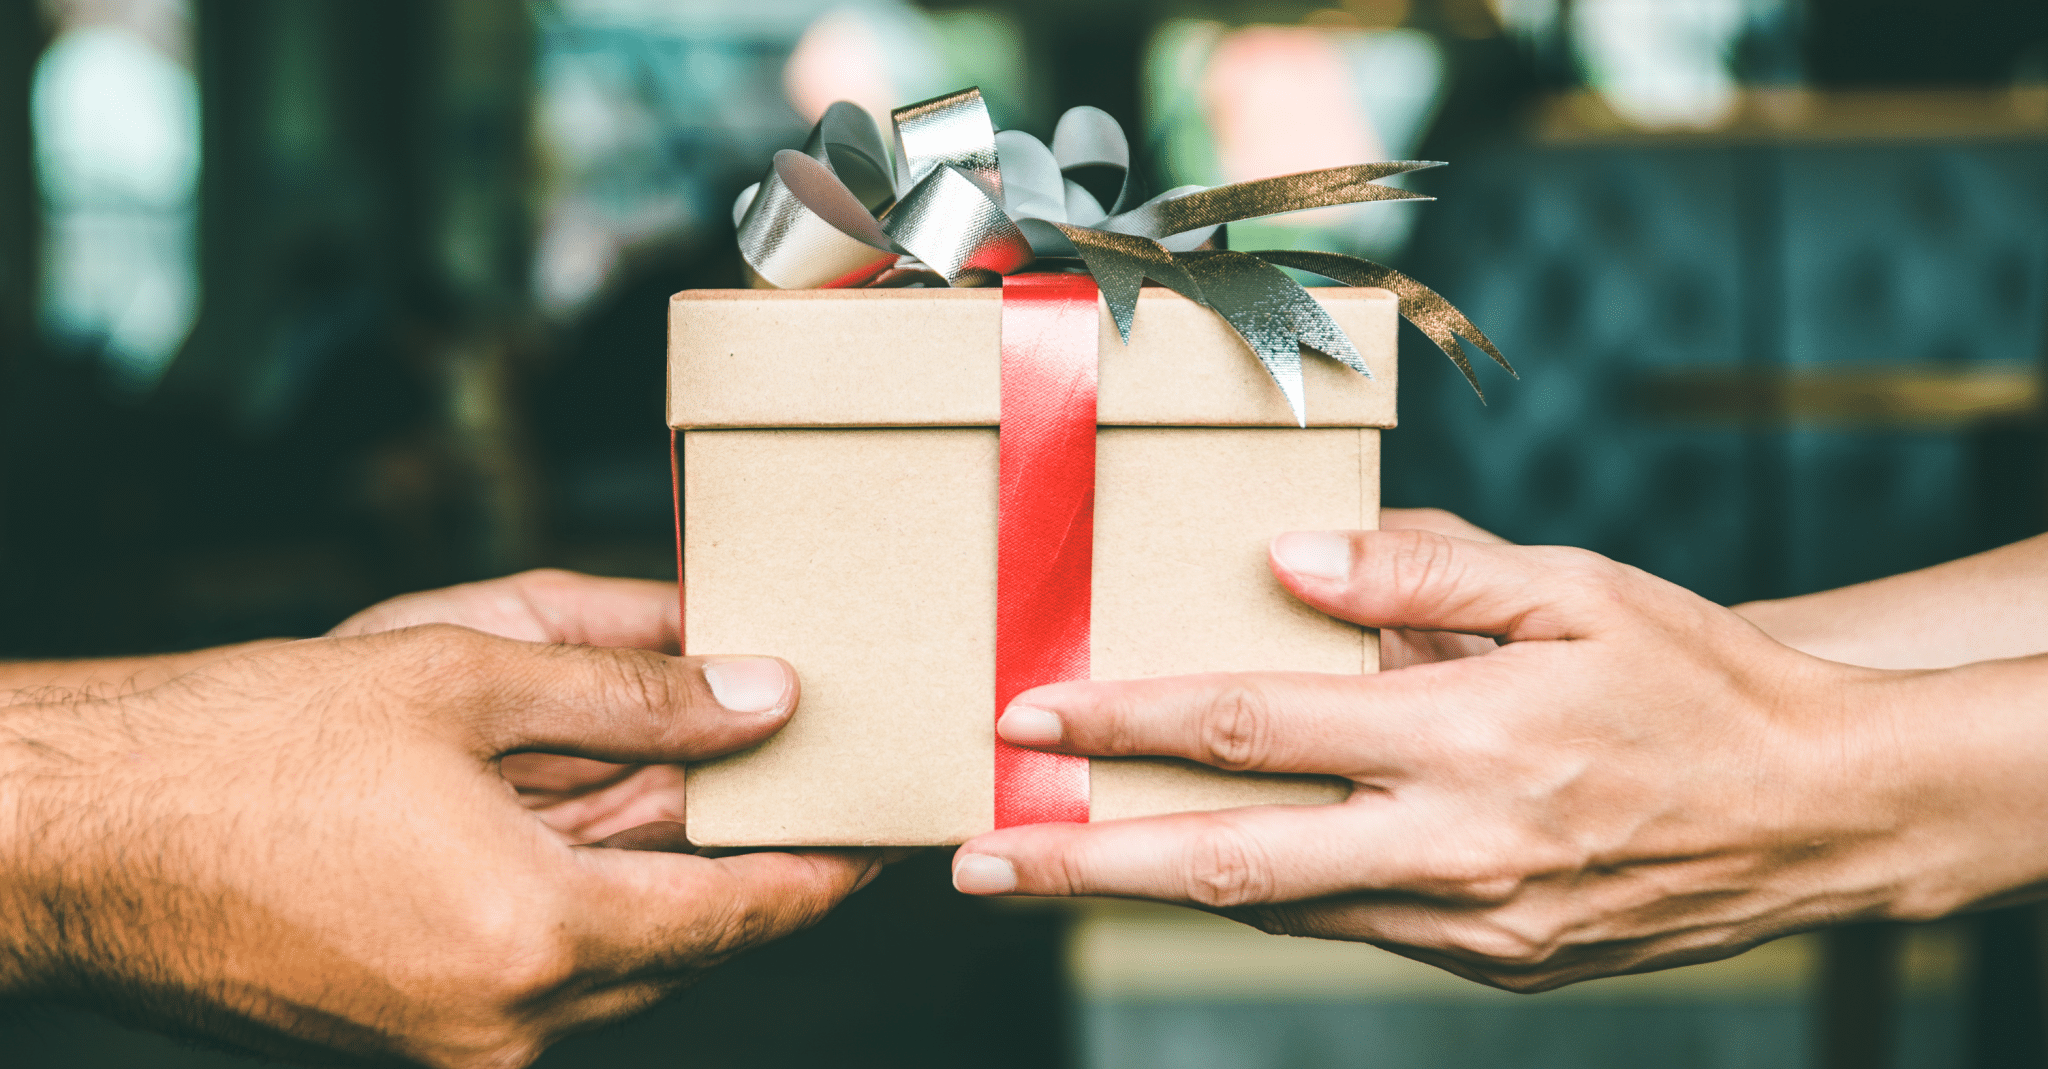 Two people's hands giving and receiving a gift